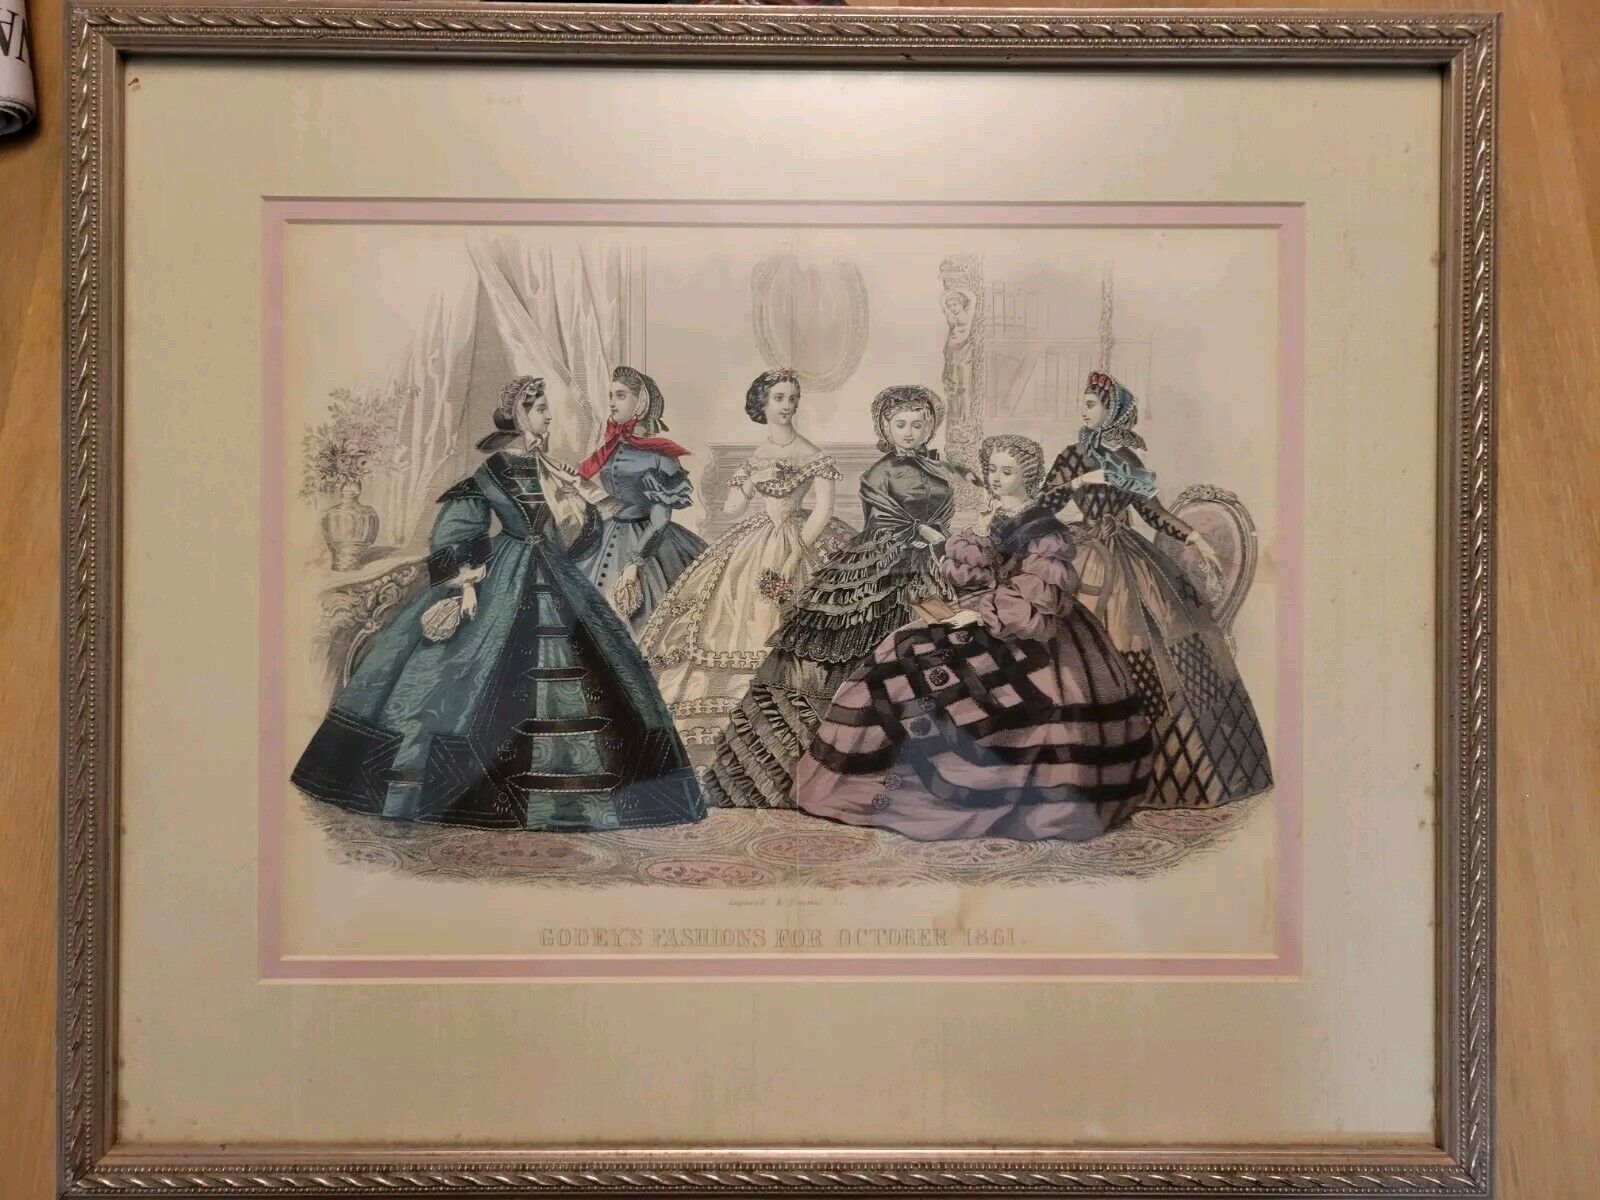 GODEY'S Lady's Book Magazine Framed Lithograph Fashion Print 1861 Advertising